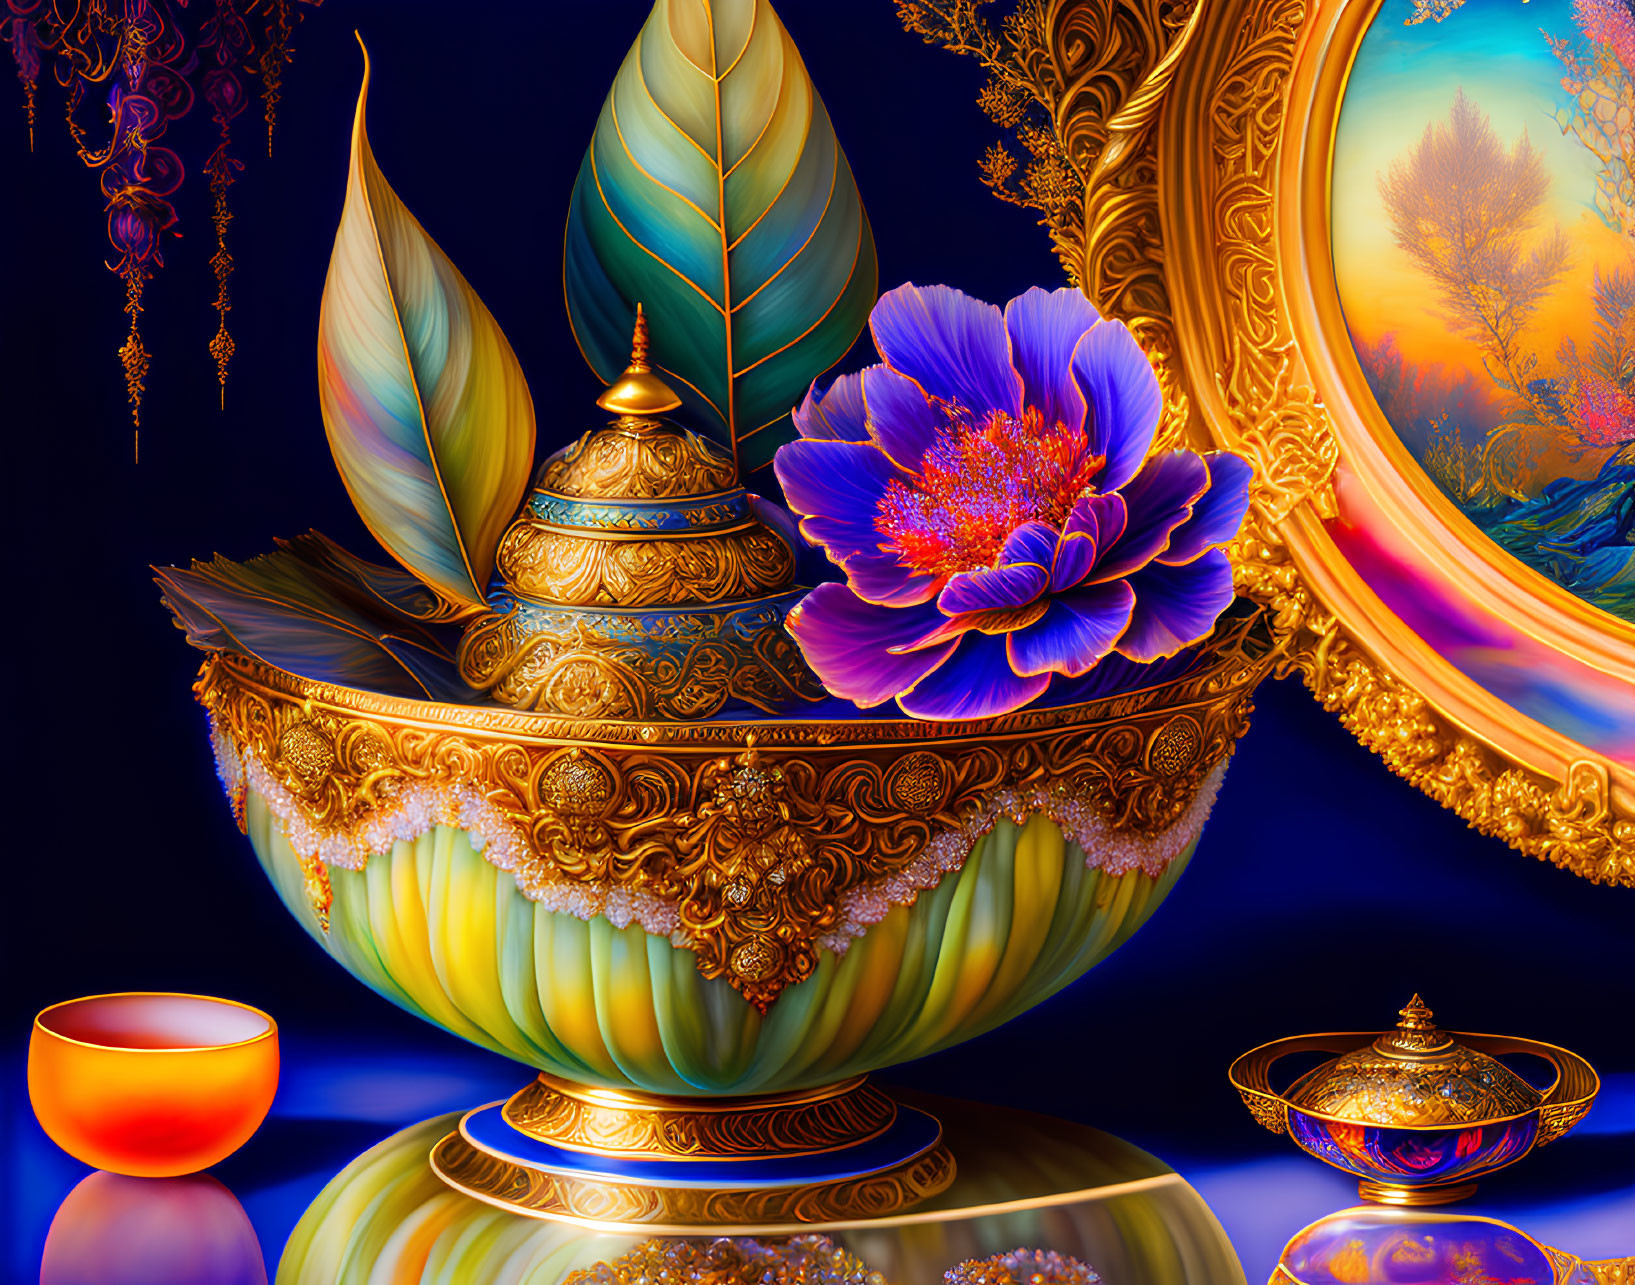 Golden bowl with feathers, flower, ornamental objects, and sunset landscape reflection